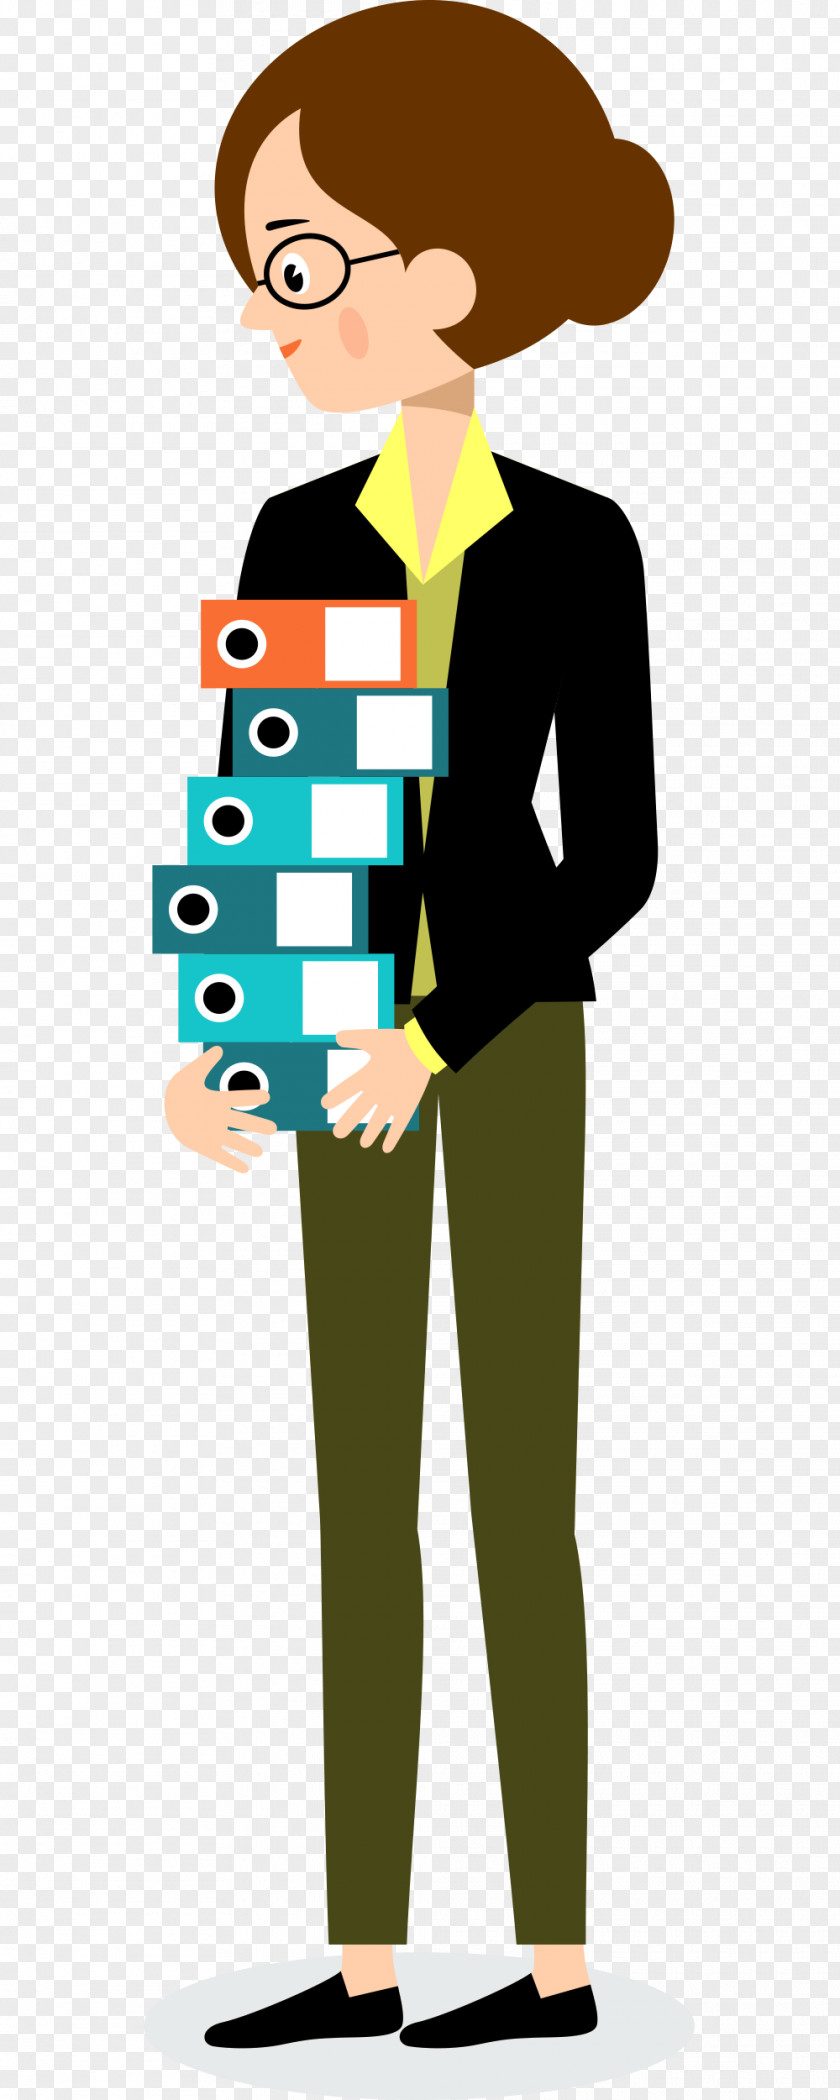 Holding A Stack Of Business Women Cartoon Illustration PNG